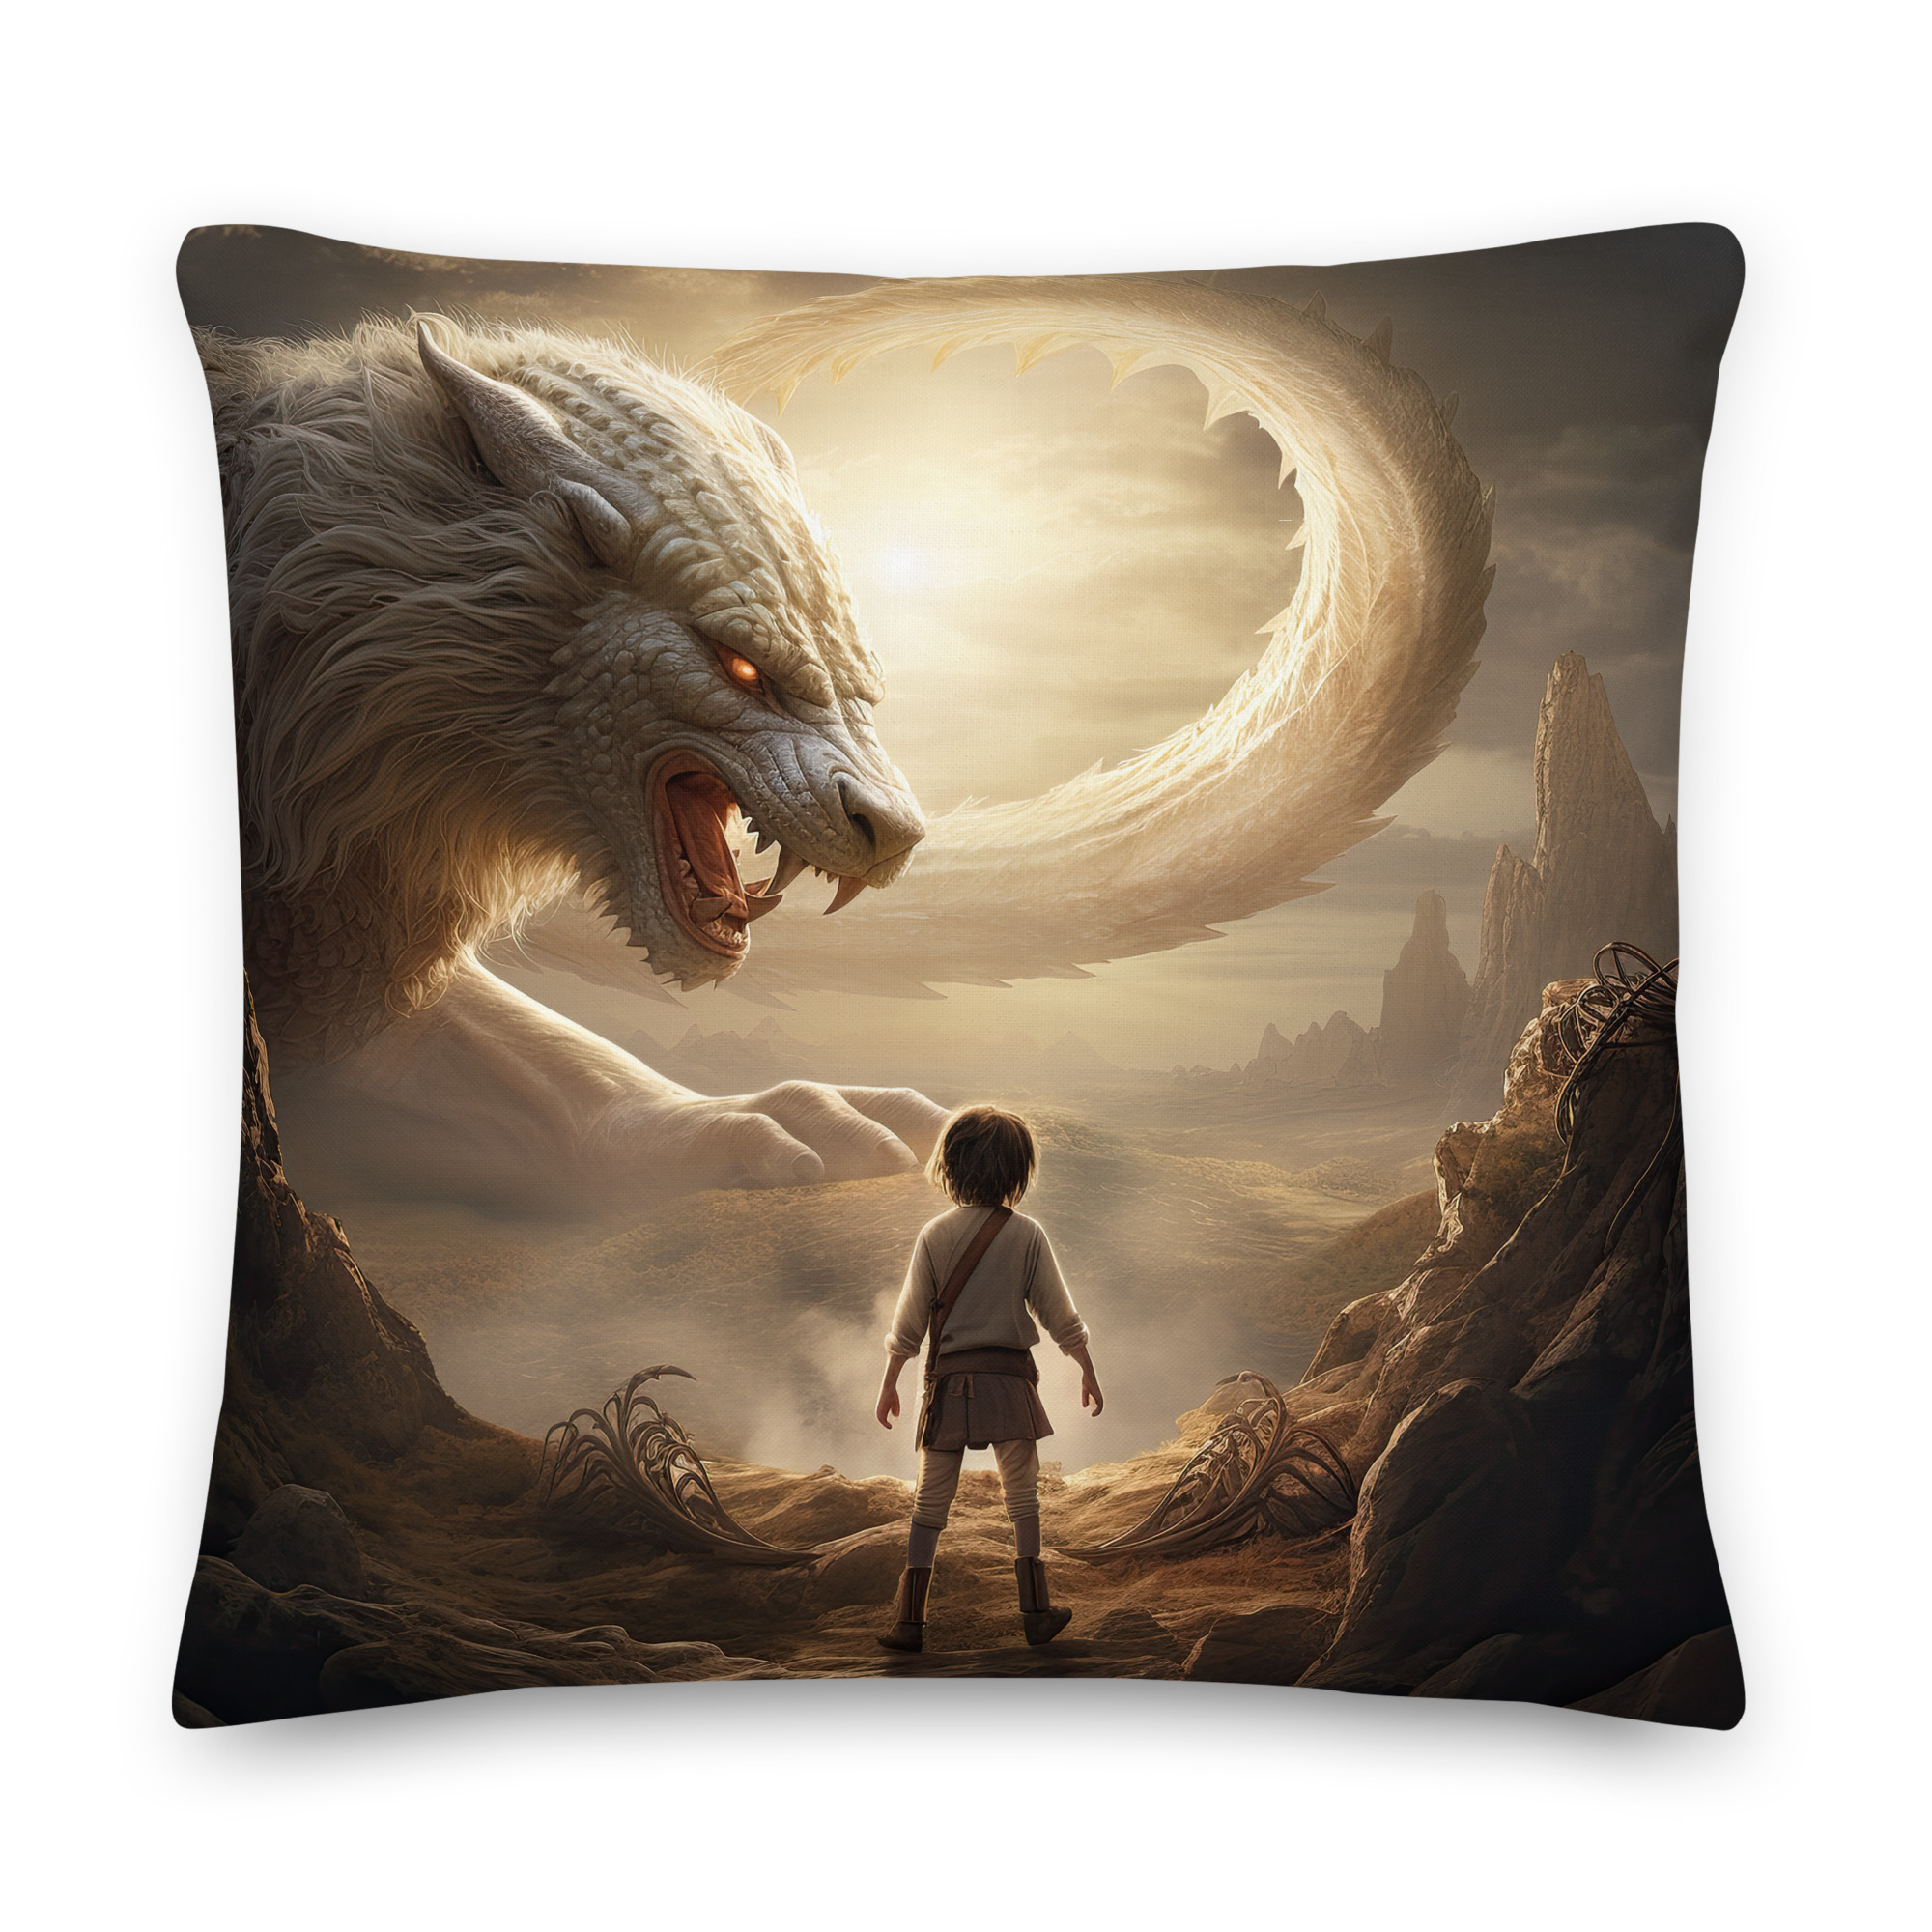 The Boy and the Chimera Throw Pillow – 22×22